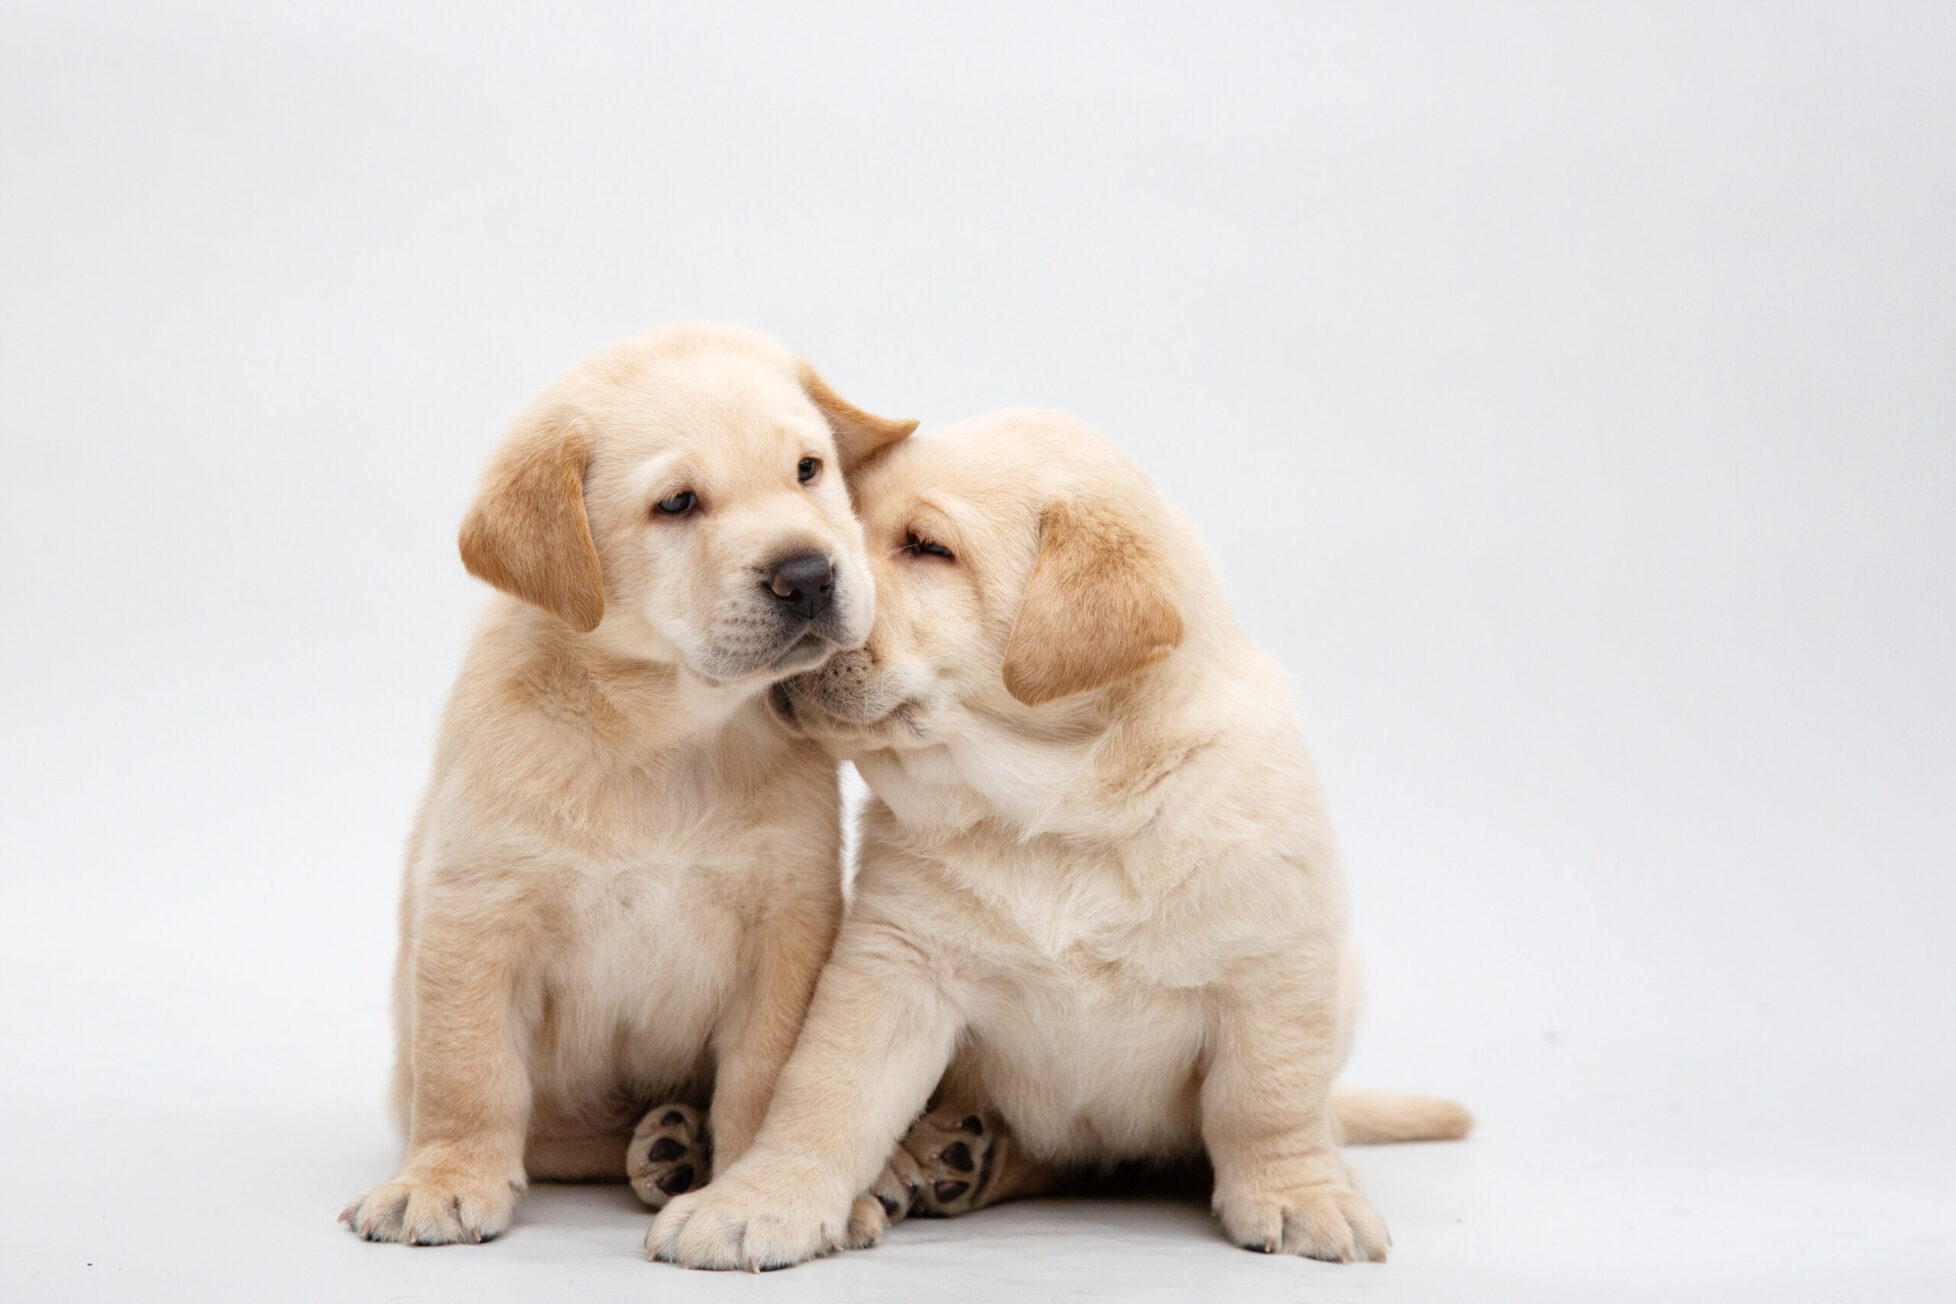 A pair of 5 week old yellow Labrador puppies. The pup on the left is looking slightly towards its left and the pup on the right is nuzzling the other pup's neck.